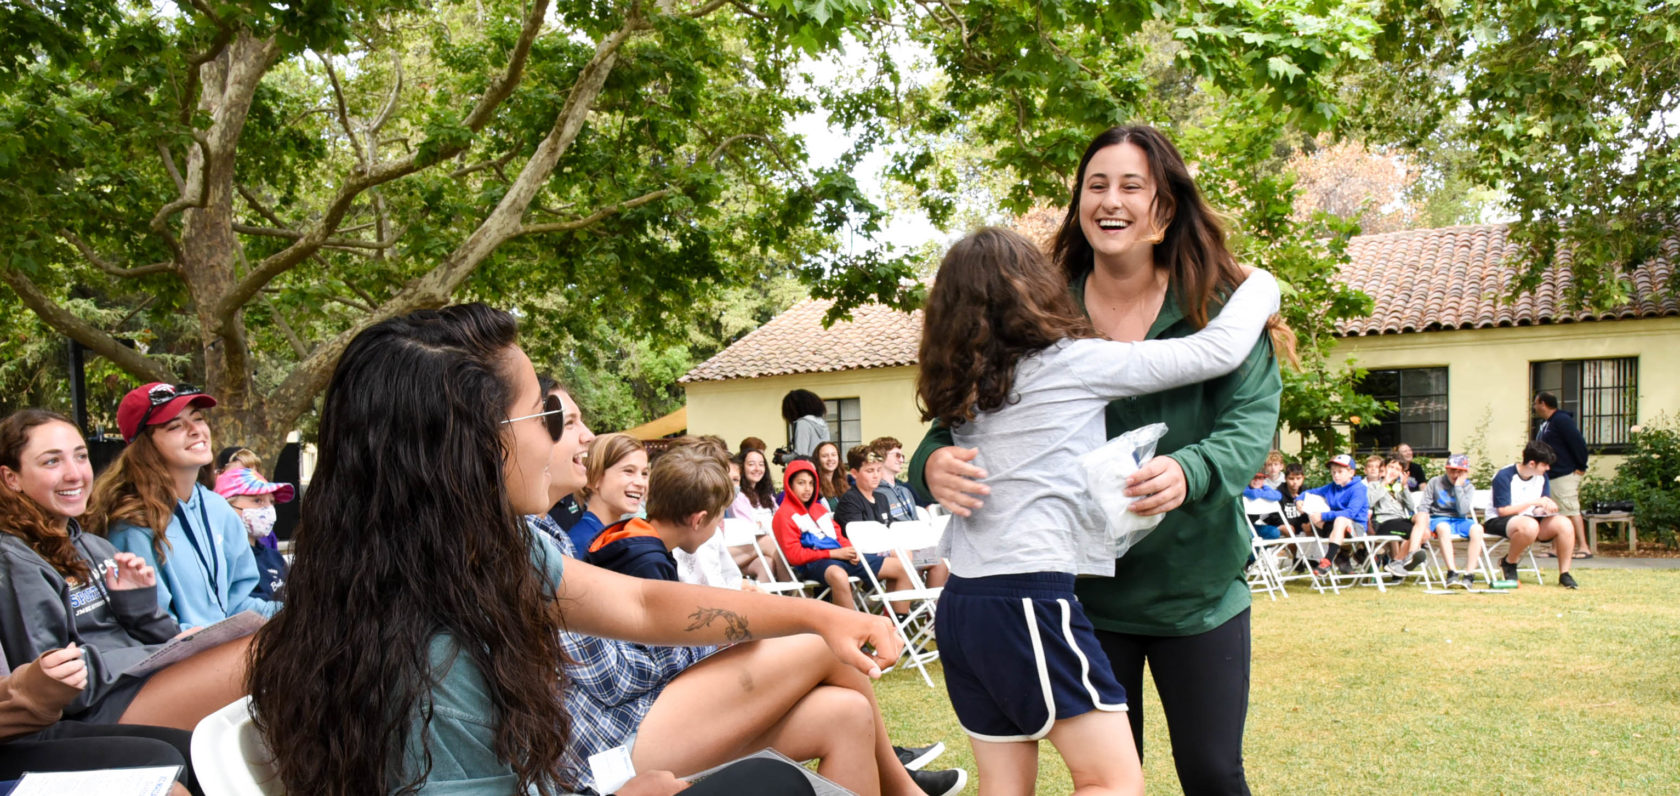 Two campers hugging at Shabbat.